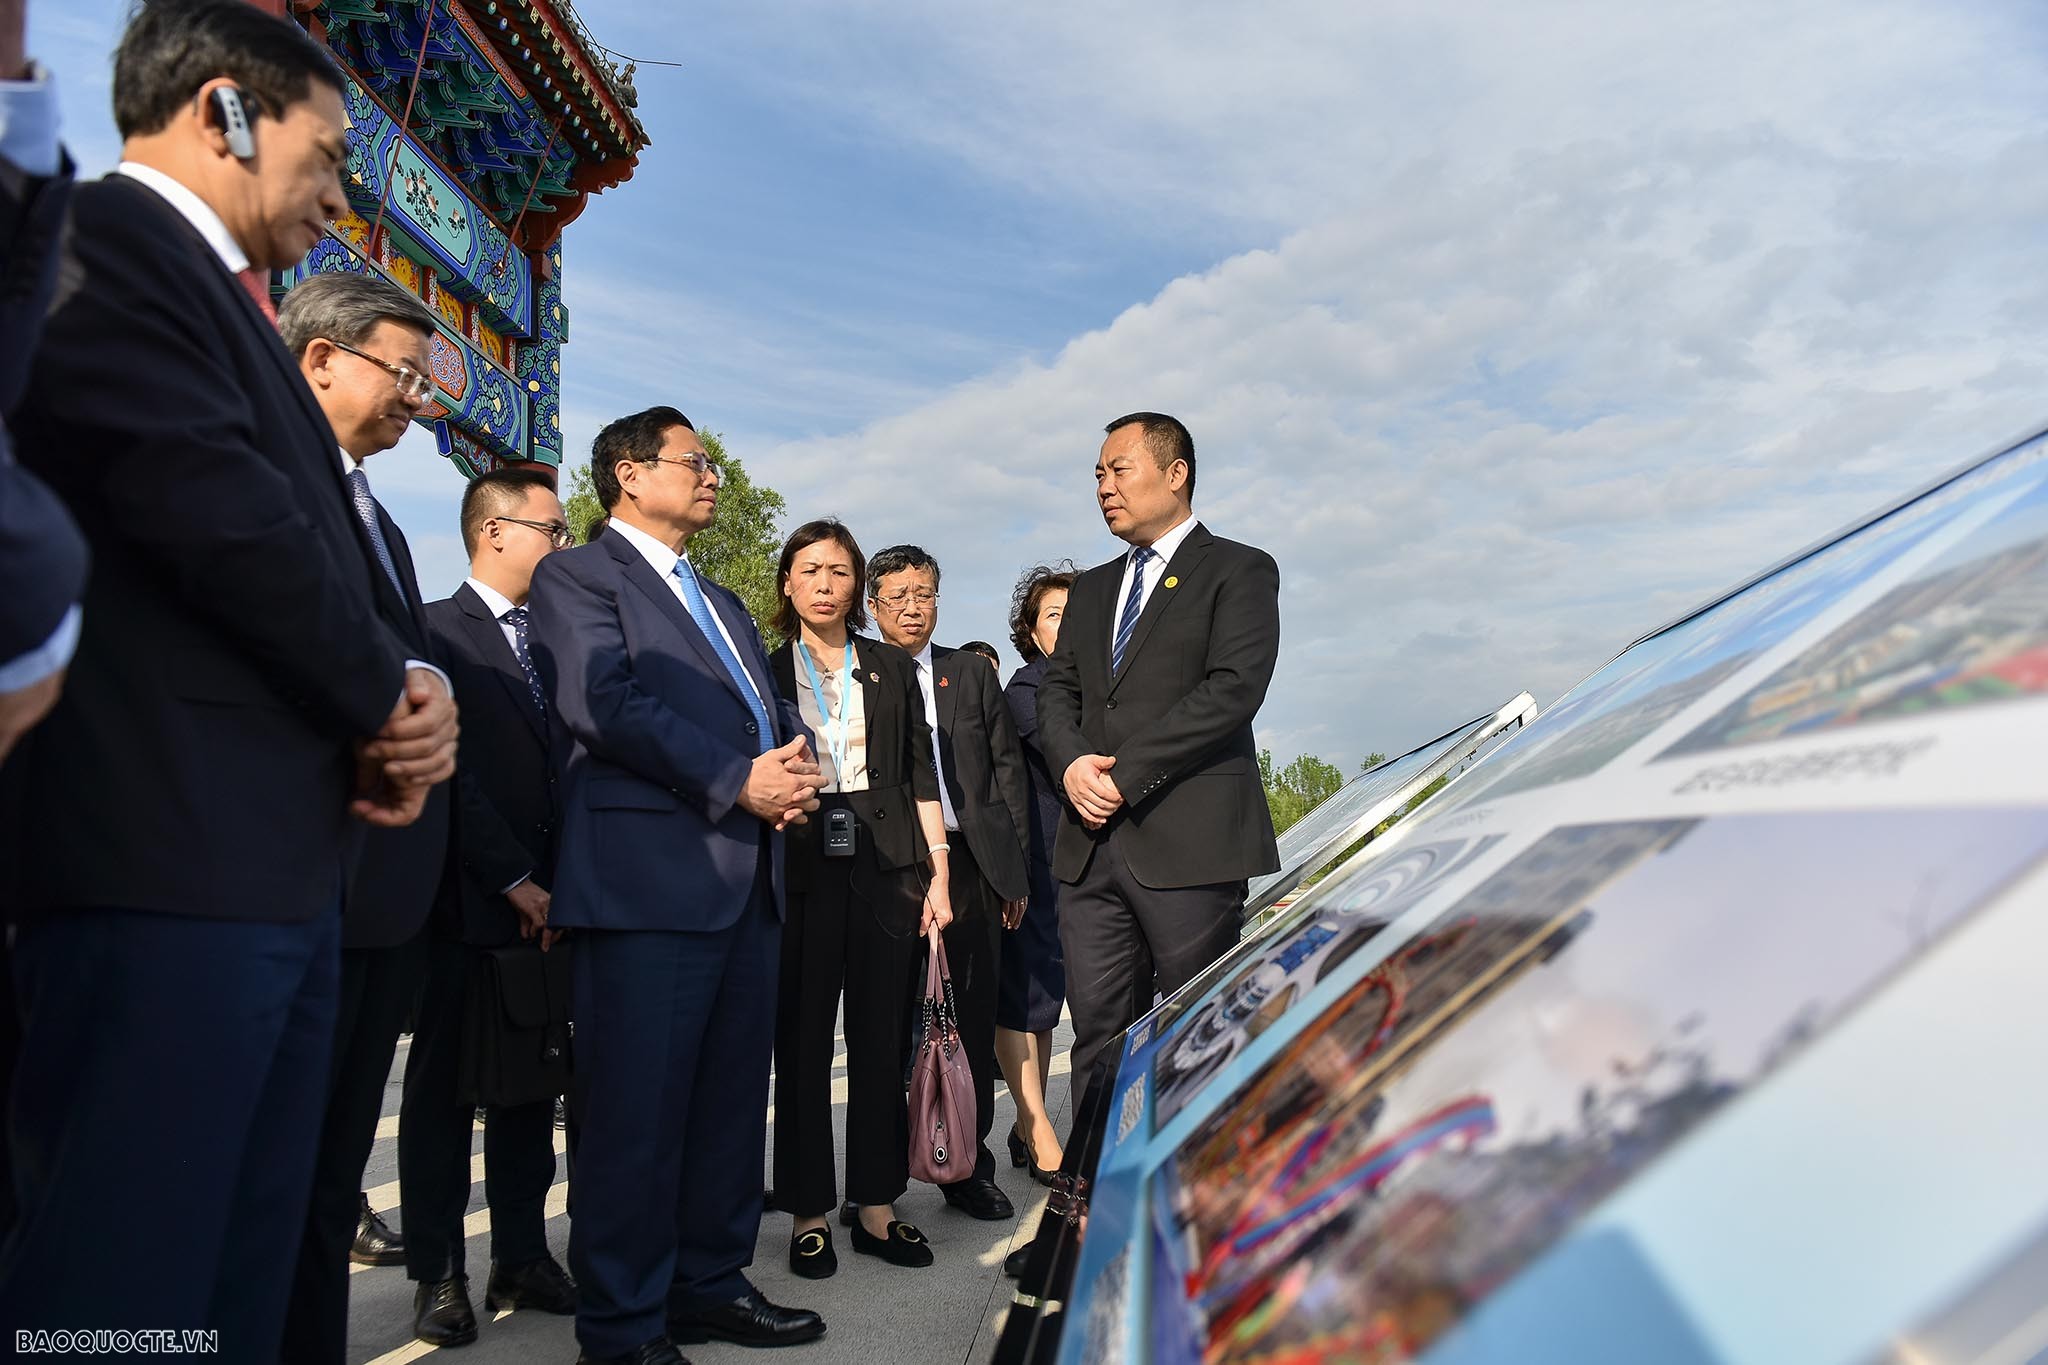 Prime Minister Pham Minh Chinh visits China’s Xiong'an New Area